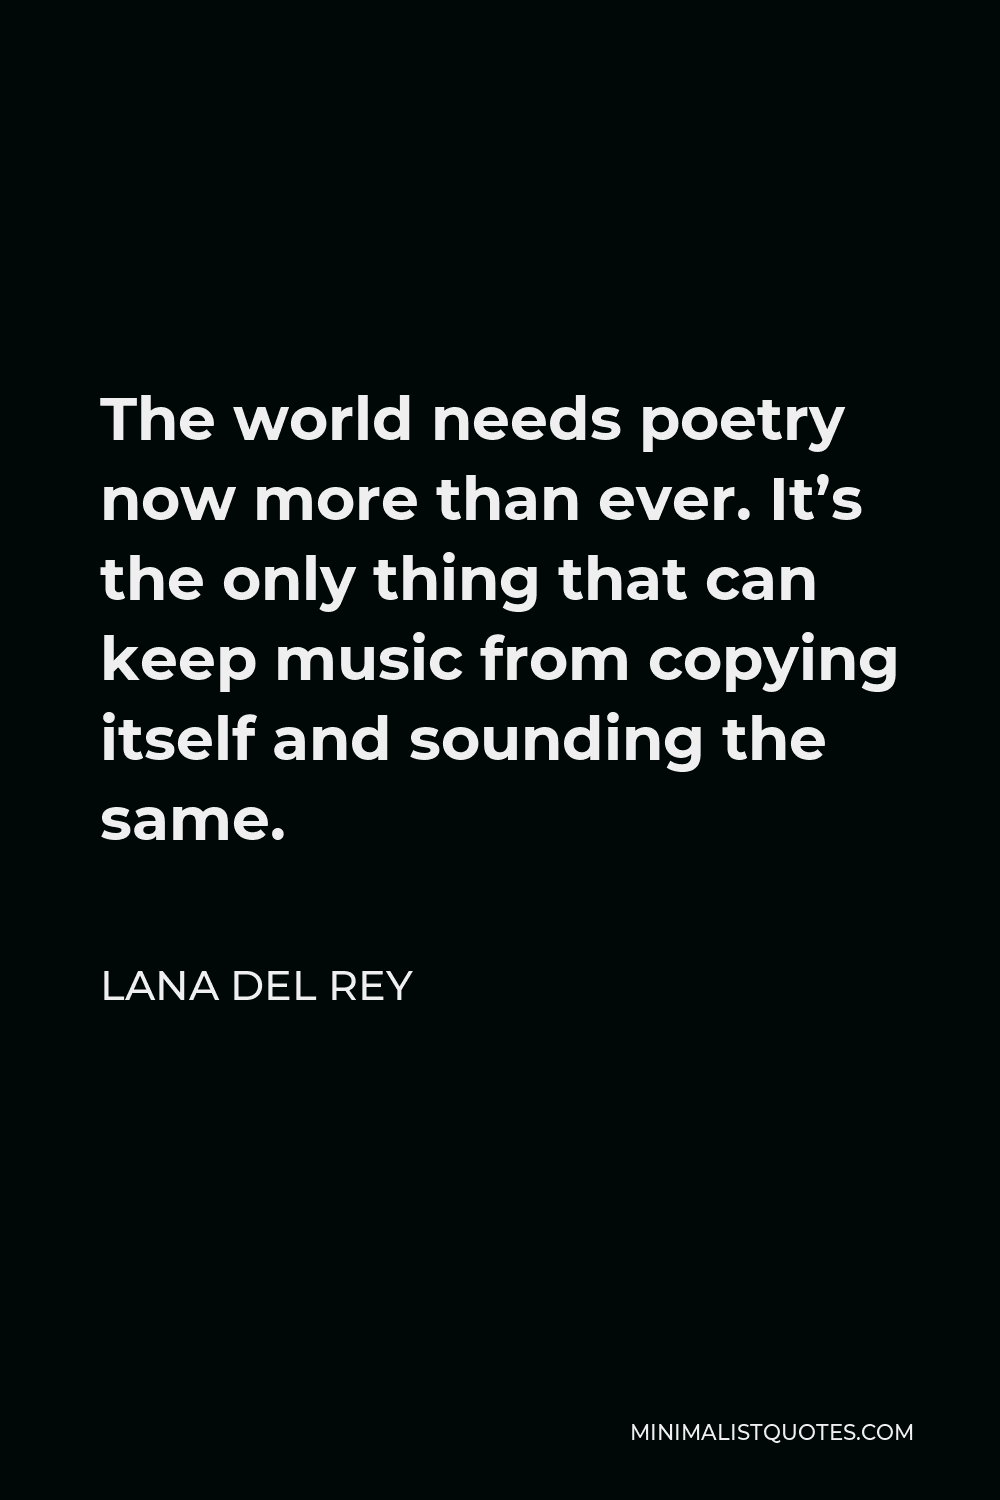 Lana Del Rey Quote - The world needs poetry now more than ever. It’s the only thing that can keep music from copying itself and sounding the same.